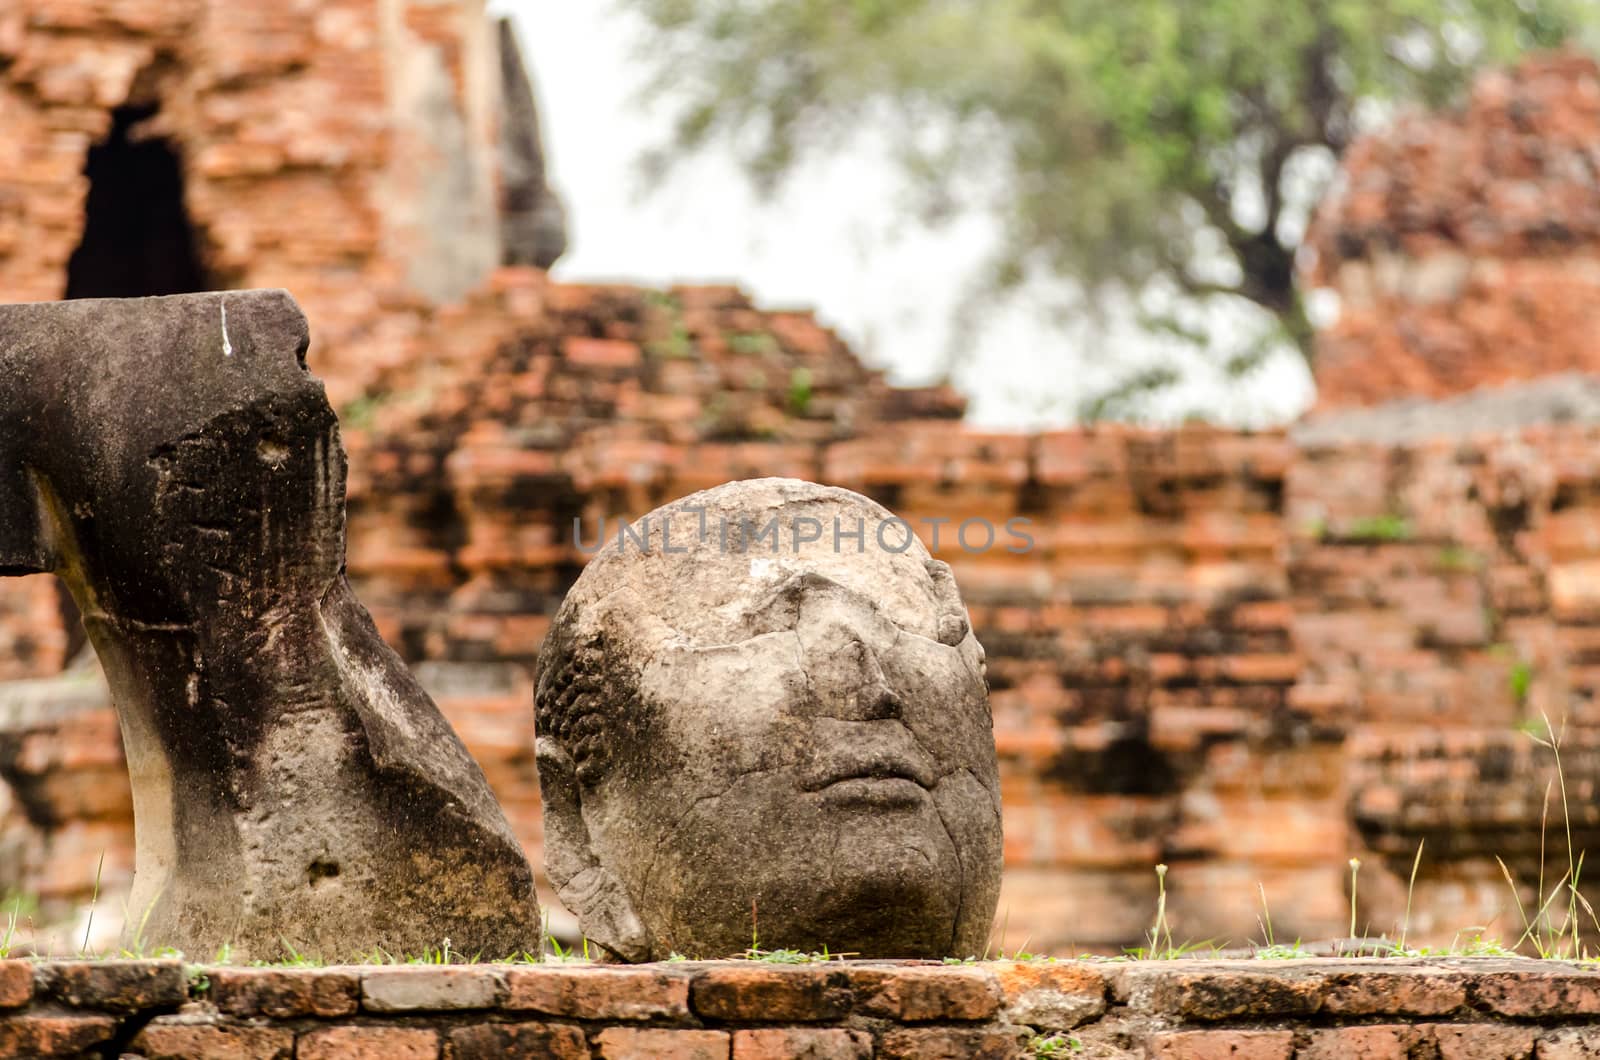 The Fracture buddha statue in Temple wat Mahathat in Ayutthaya historical park, Thailand